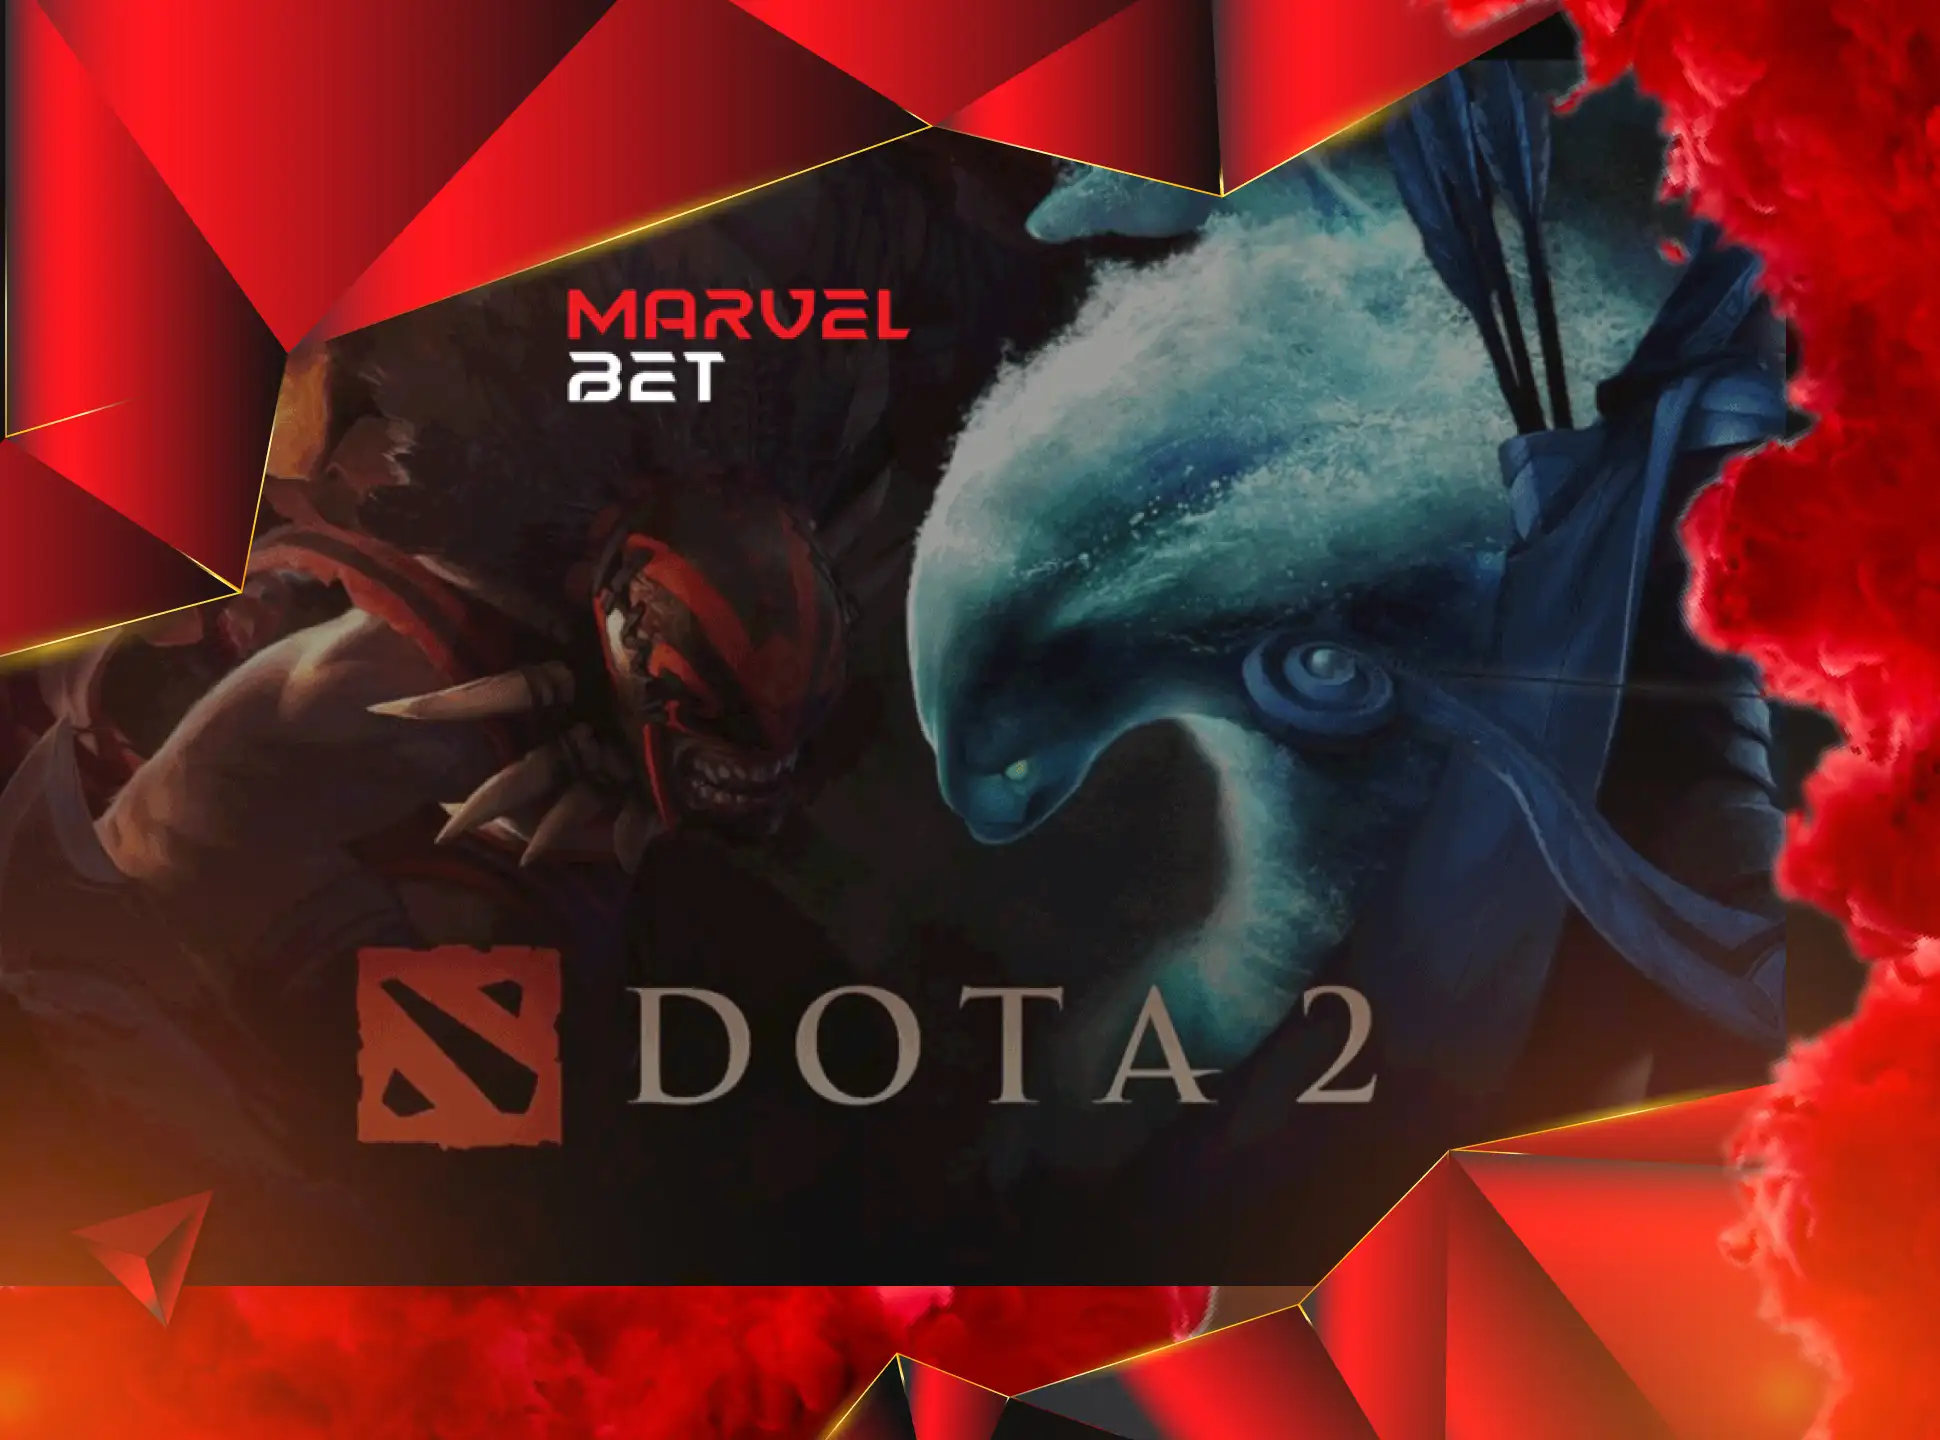 Dota 2 betting is a popular option among the cybersports lovers at MarvelBet.